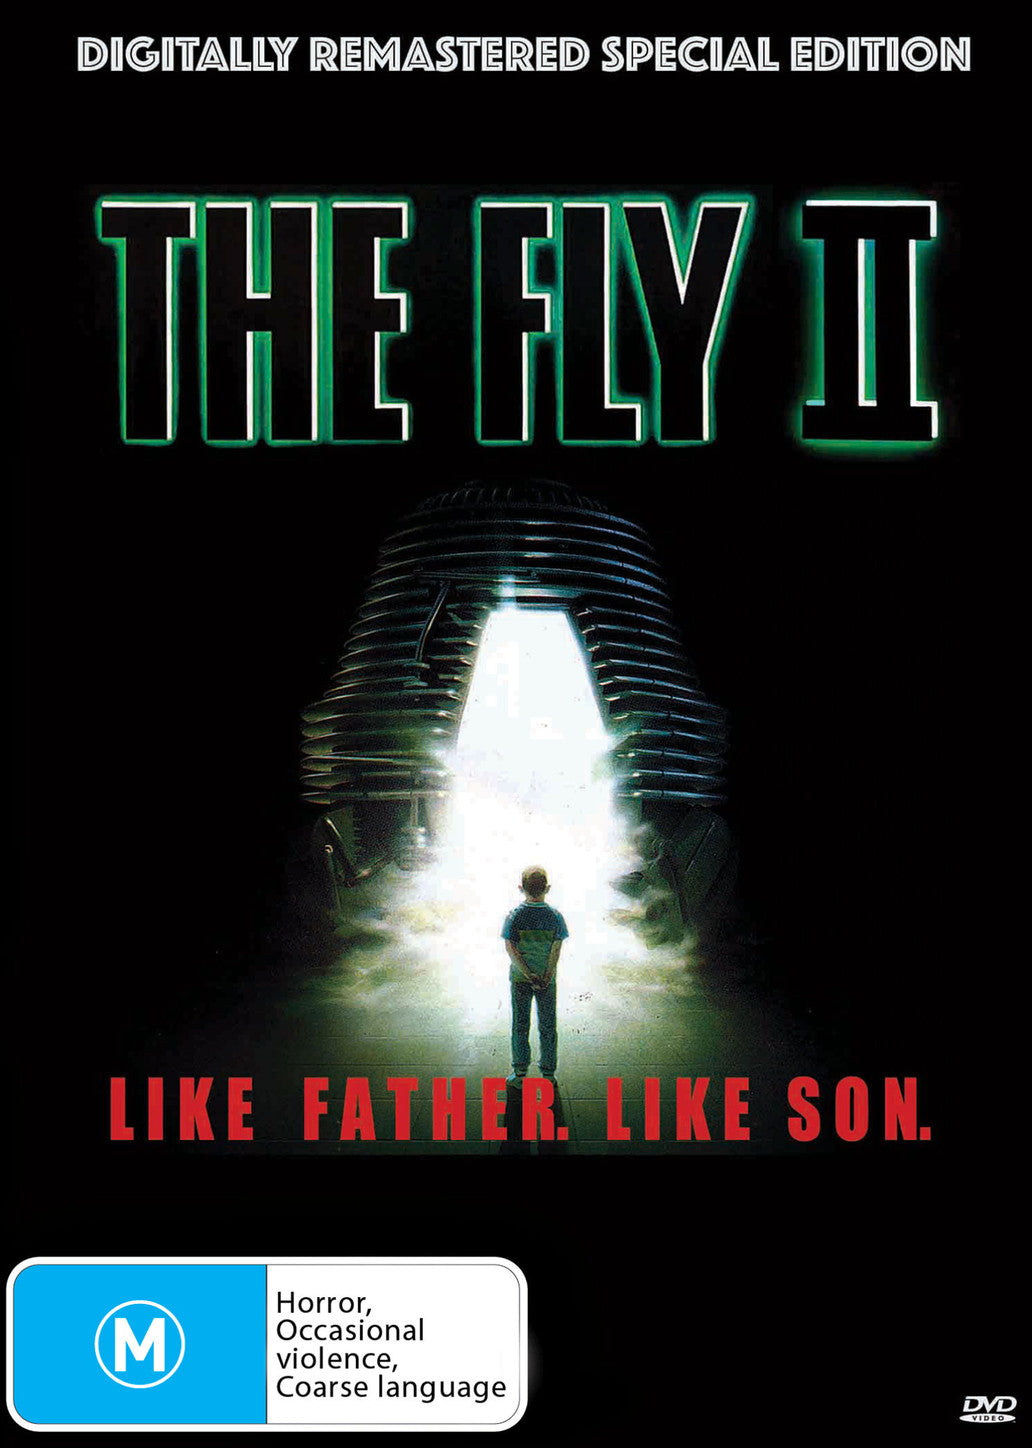 THE FLY II (1989) DVD DIGITALLY REMASTERED SPECIAL EDITION